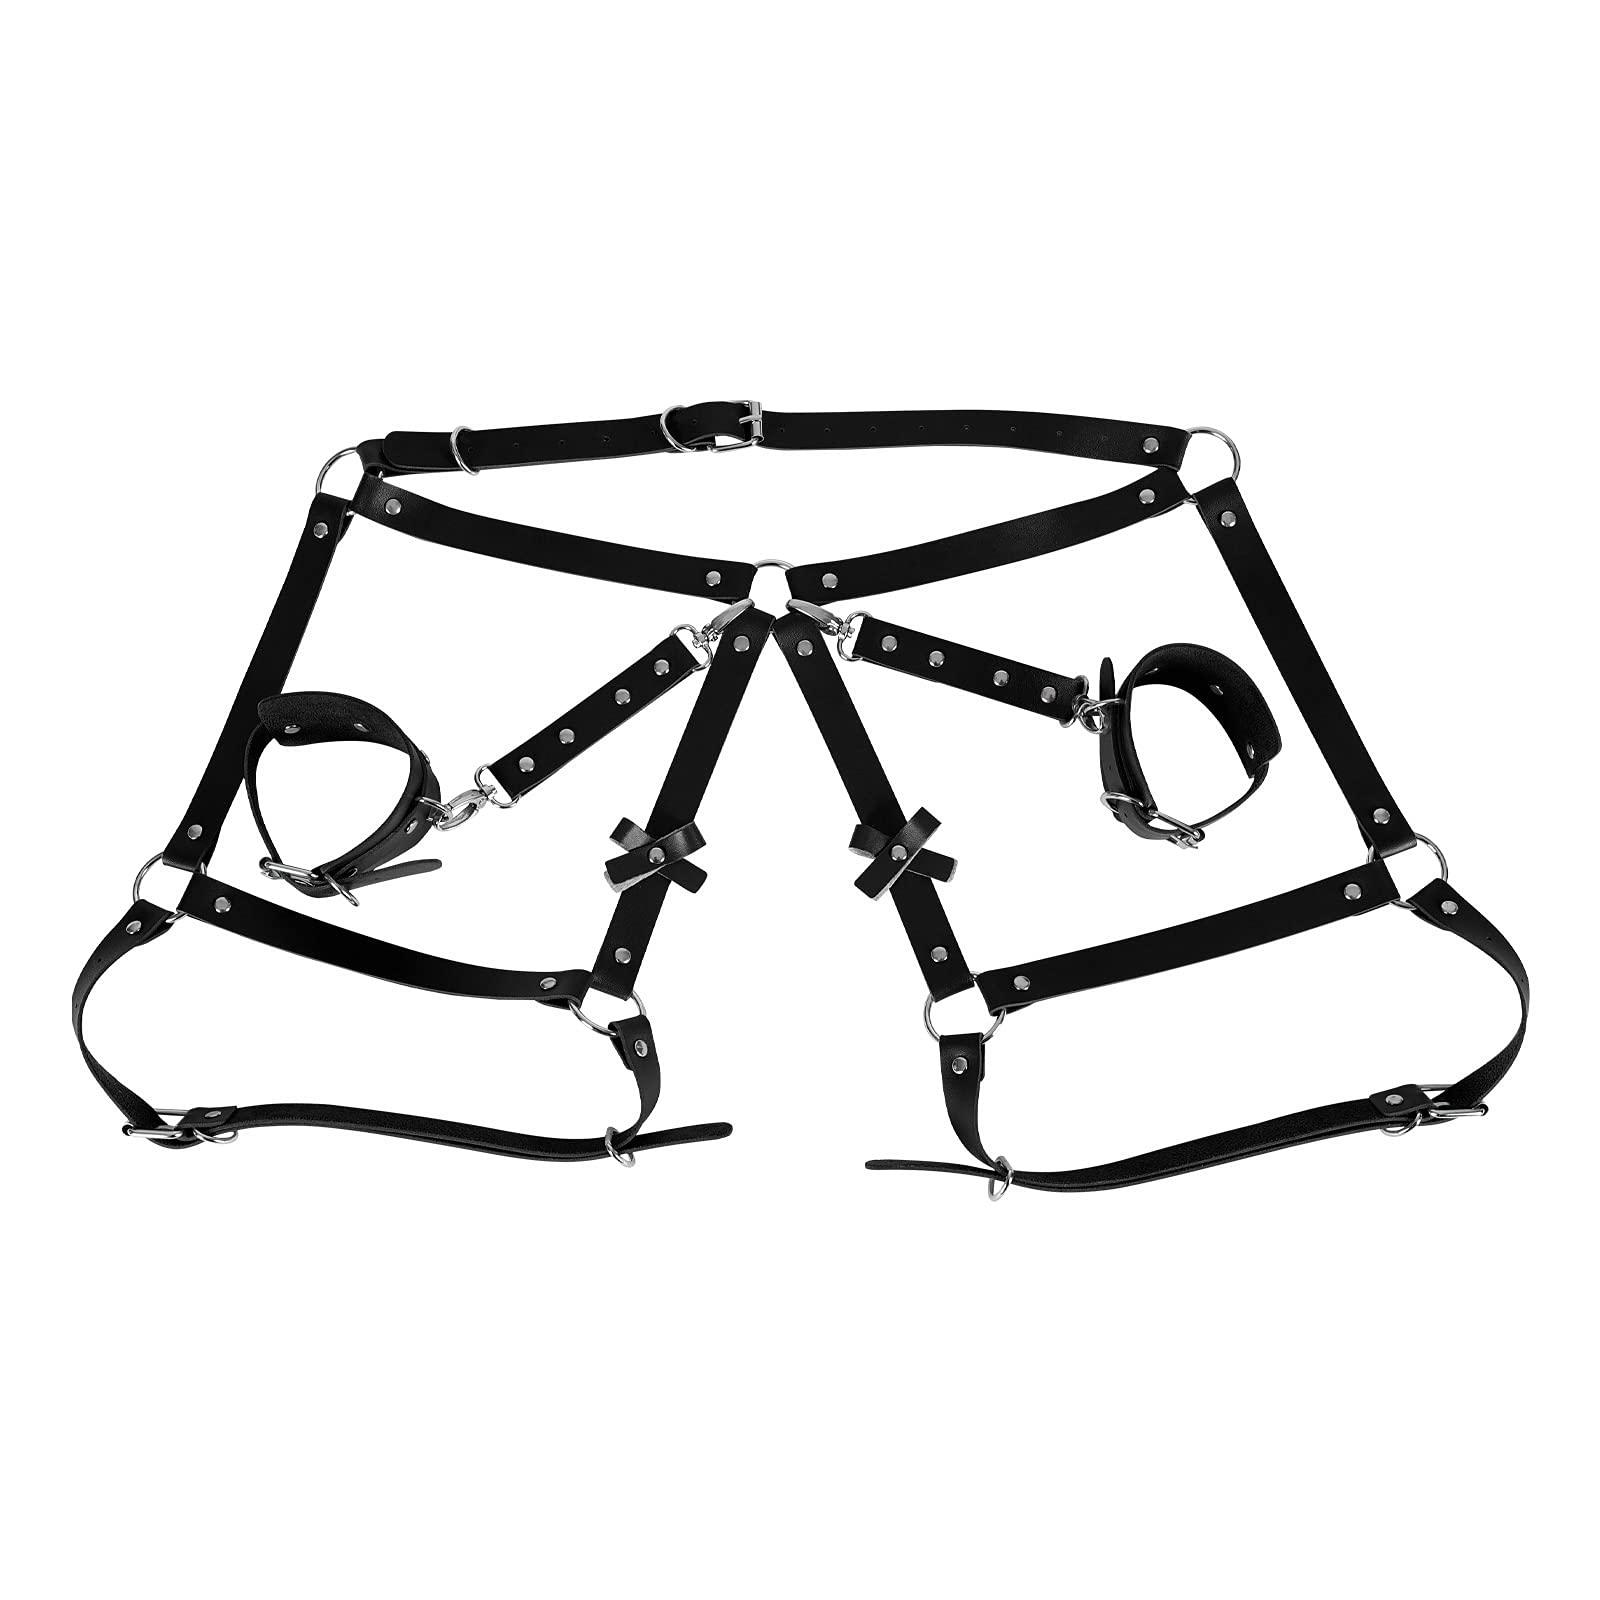 Women Punk Leather Body Cage Waist Belts Novelty Gothic Harness Hollow Out Strap Adjust Size Fetish Rave Costume (Black)